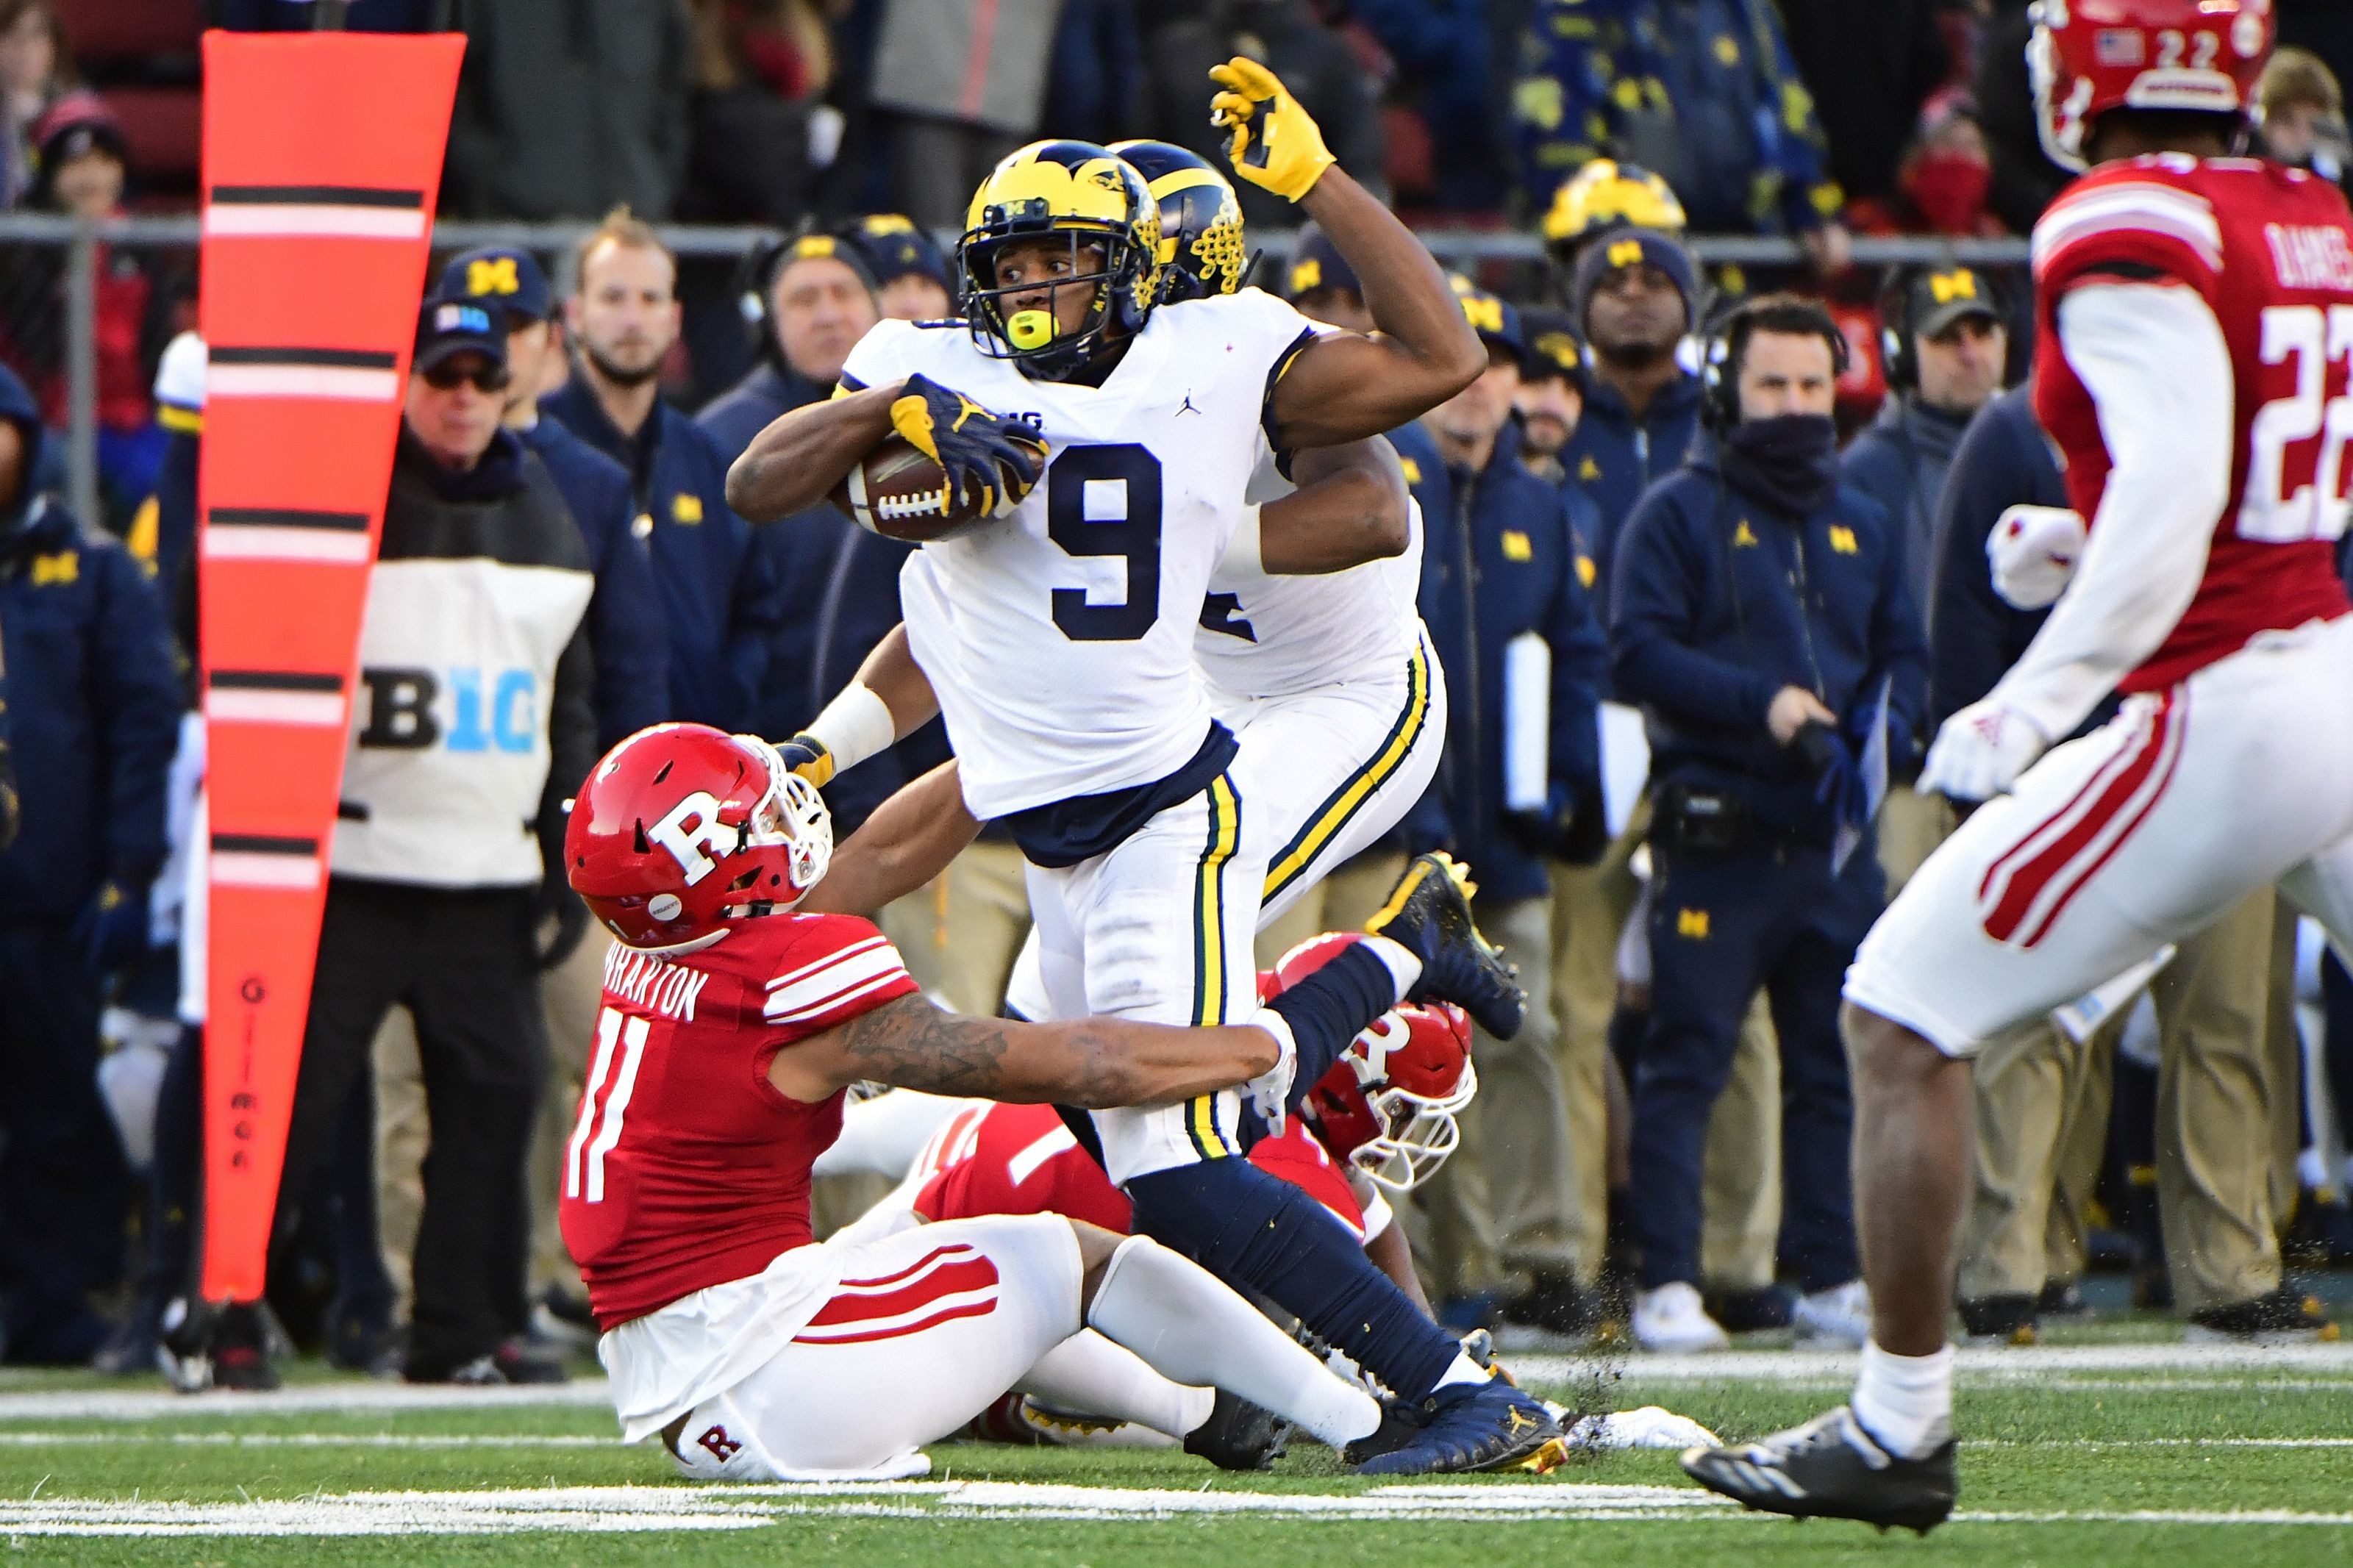 Michigan football: Everything you need to know about Rutgers